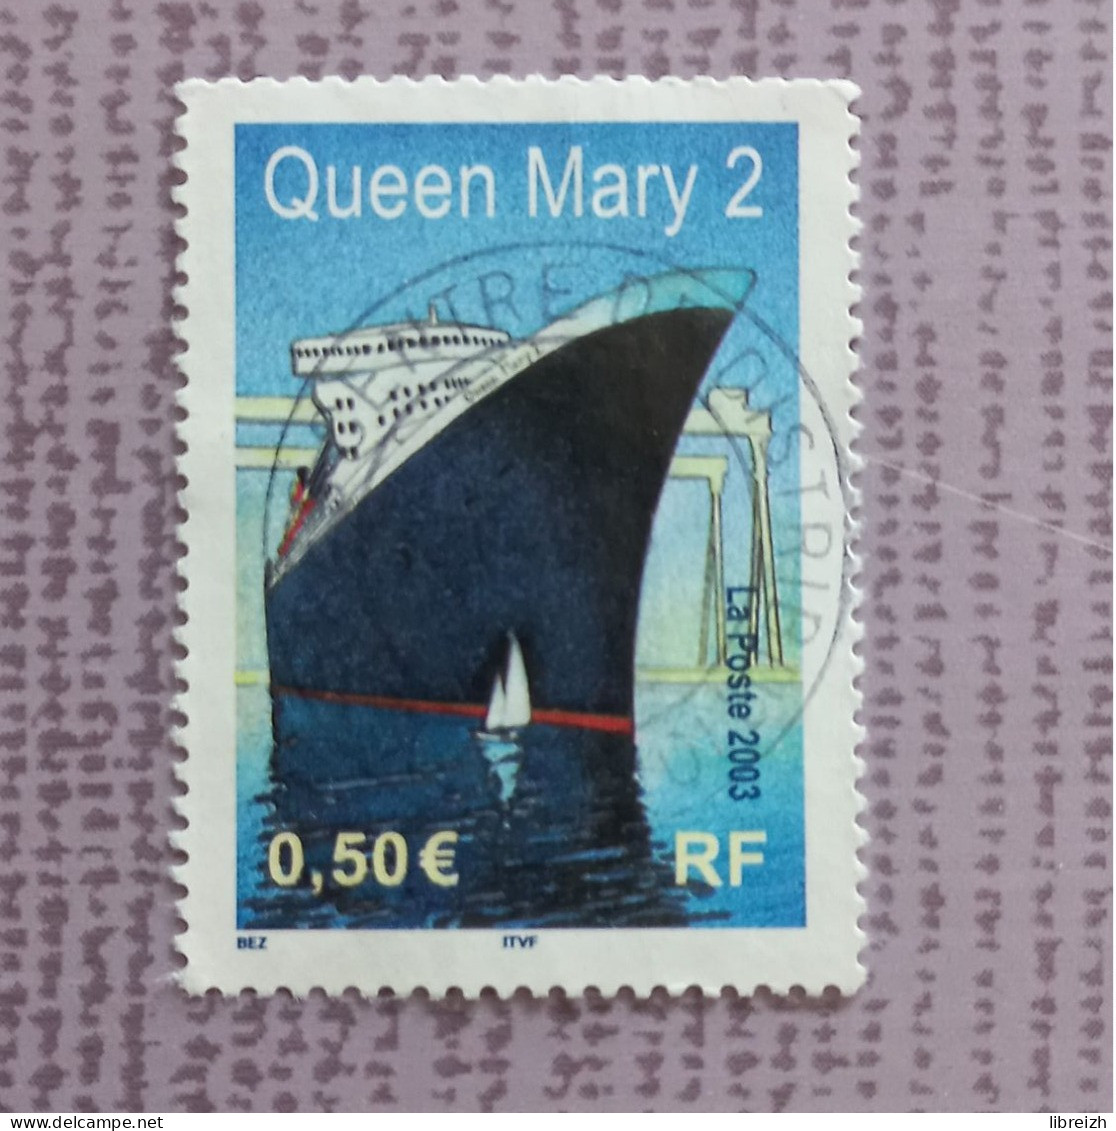 Queen Mary 2  N° 3631  Année 2003 - Used Stamps